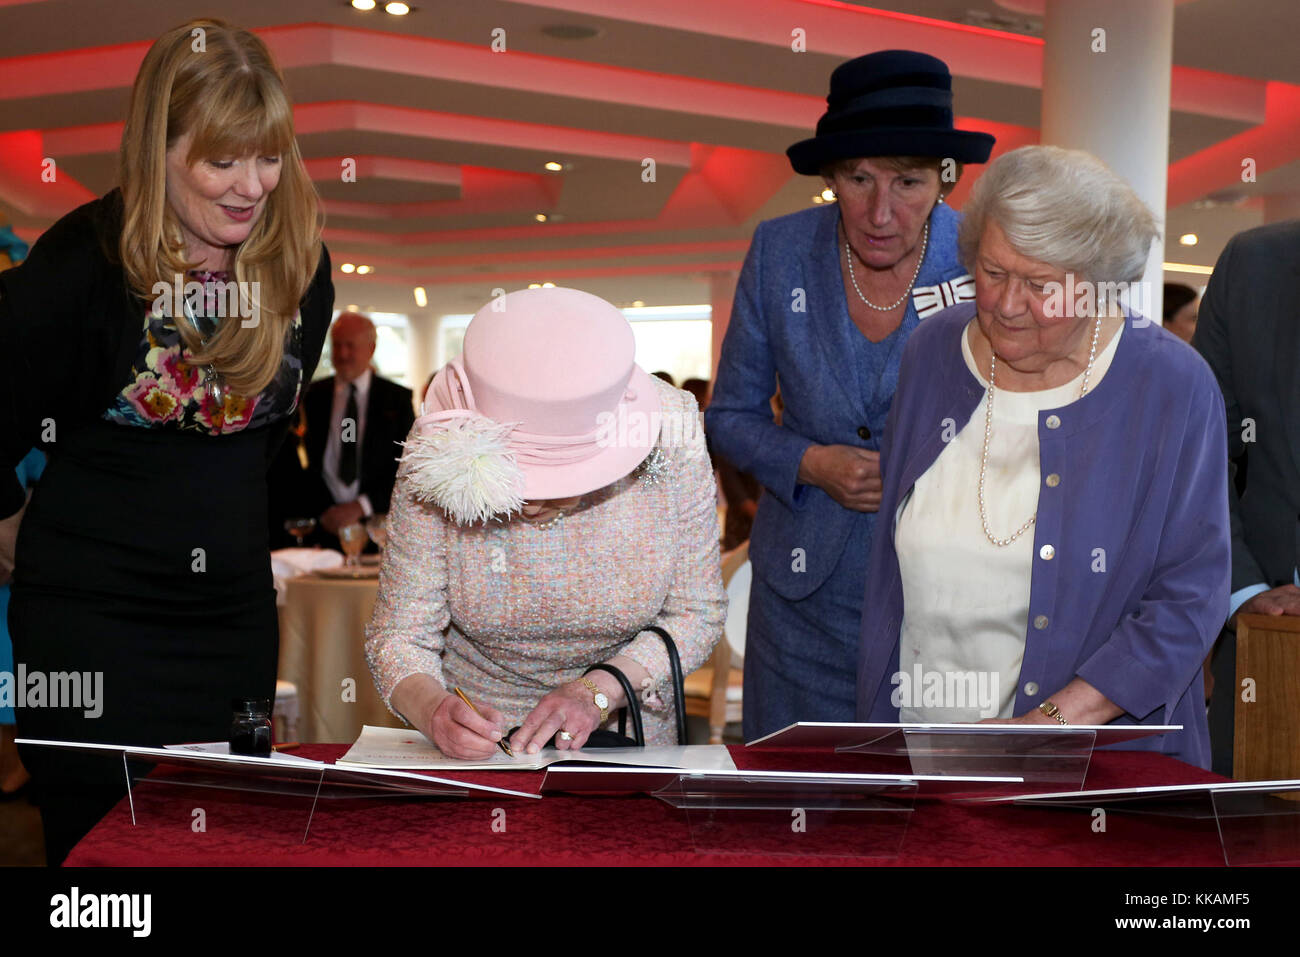 Chichester, West Sussex, UK. 30th November, 2017. Her Majesty The Queen's visit to the Chichester Festival Theatre in Chichester, West Sussex, UK.  Thursday 30th November 2017   Credit: Sam Stephenson/Alamy Live News Stock Photo